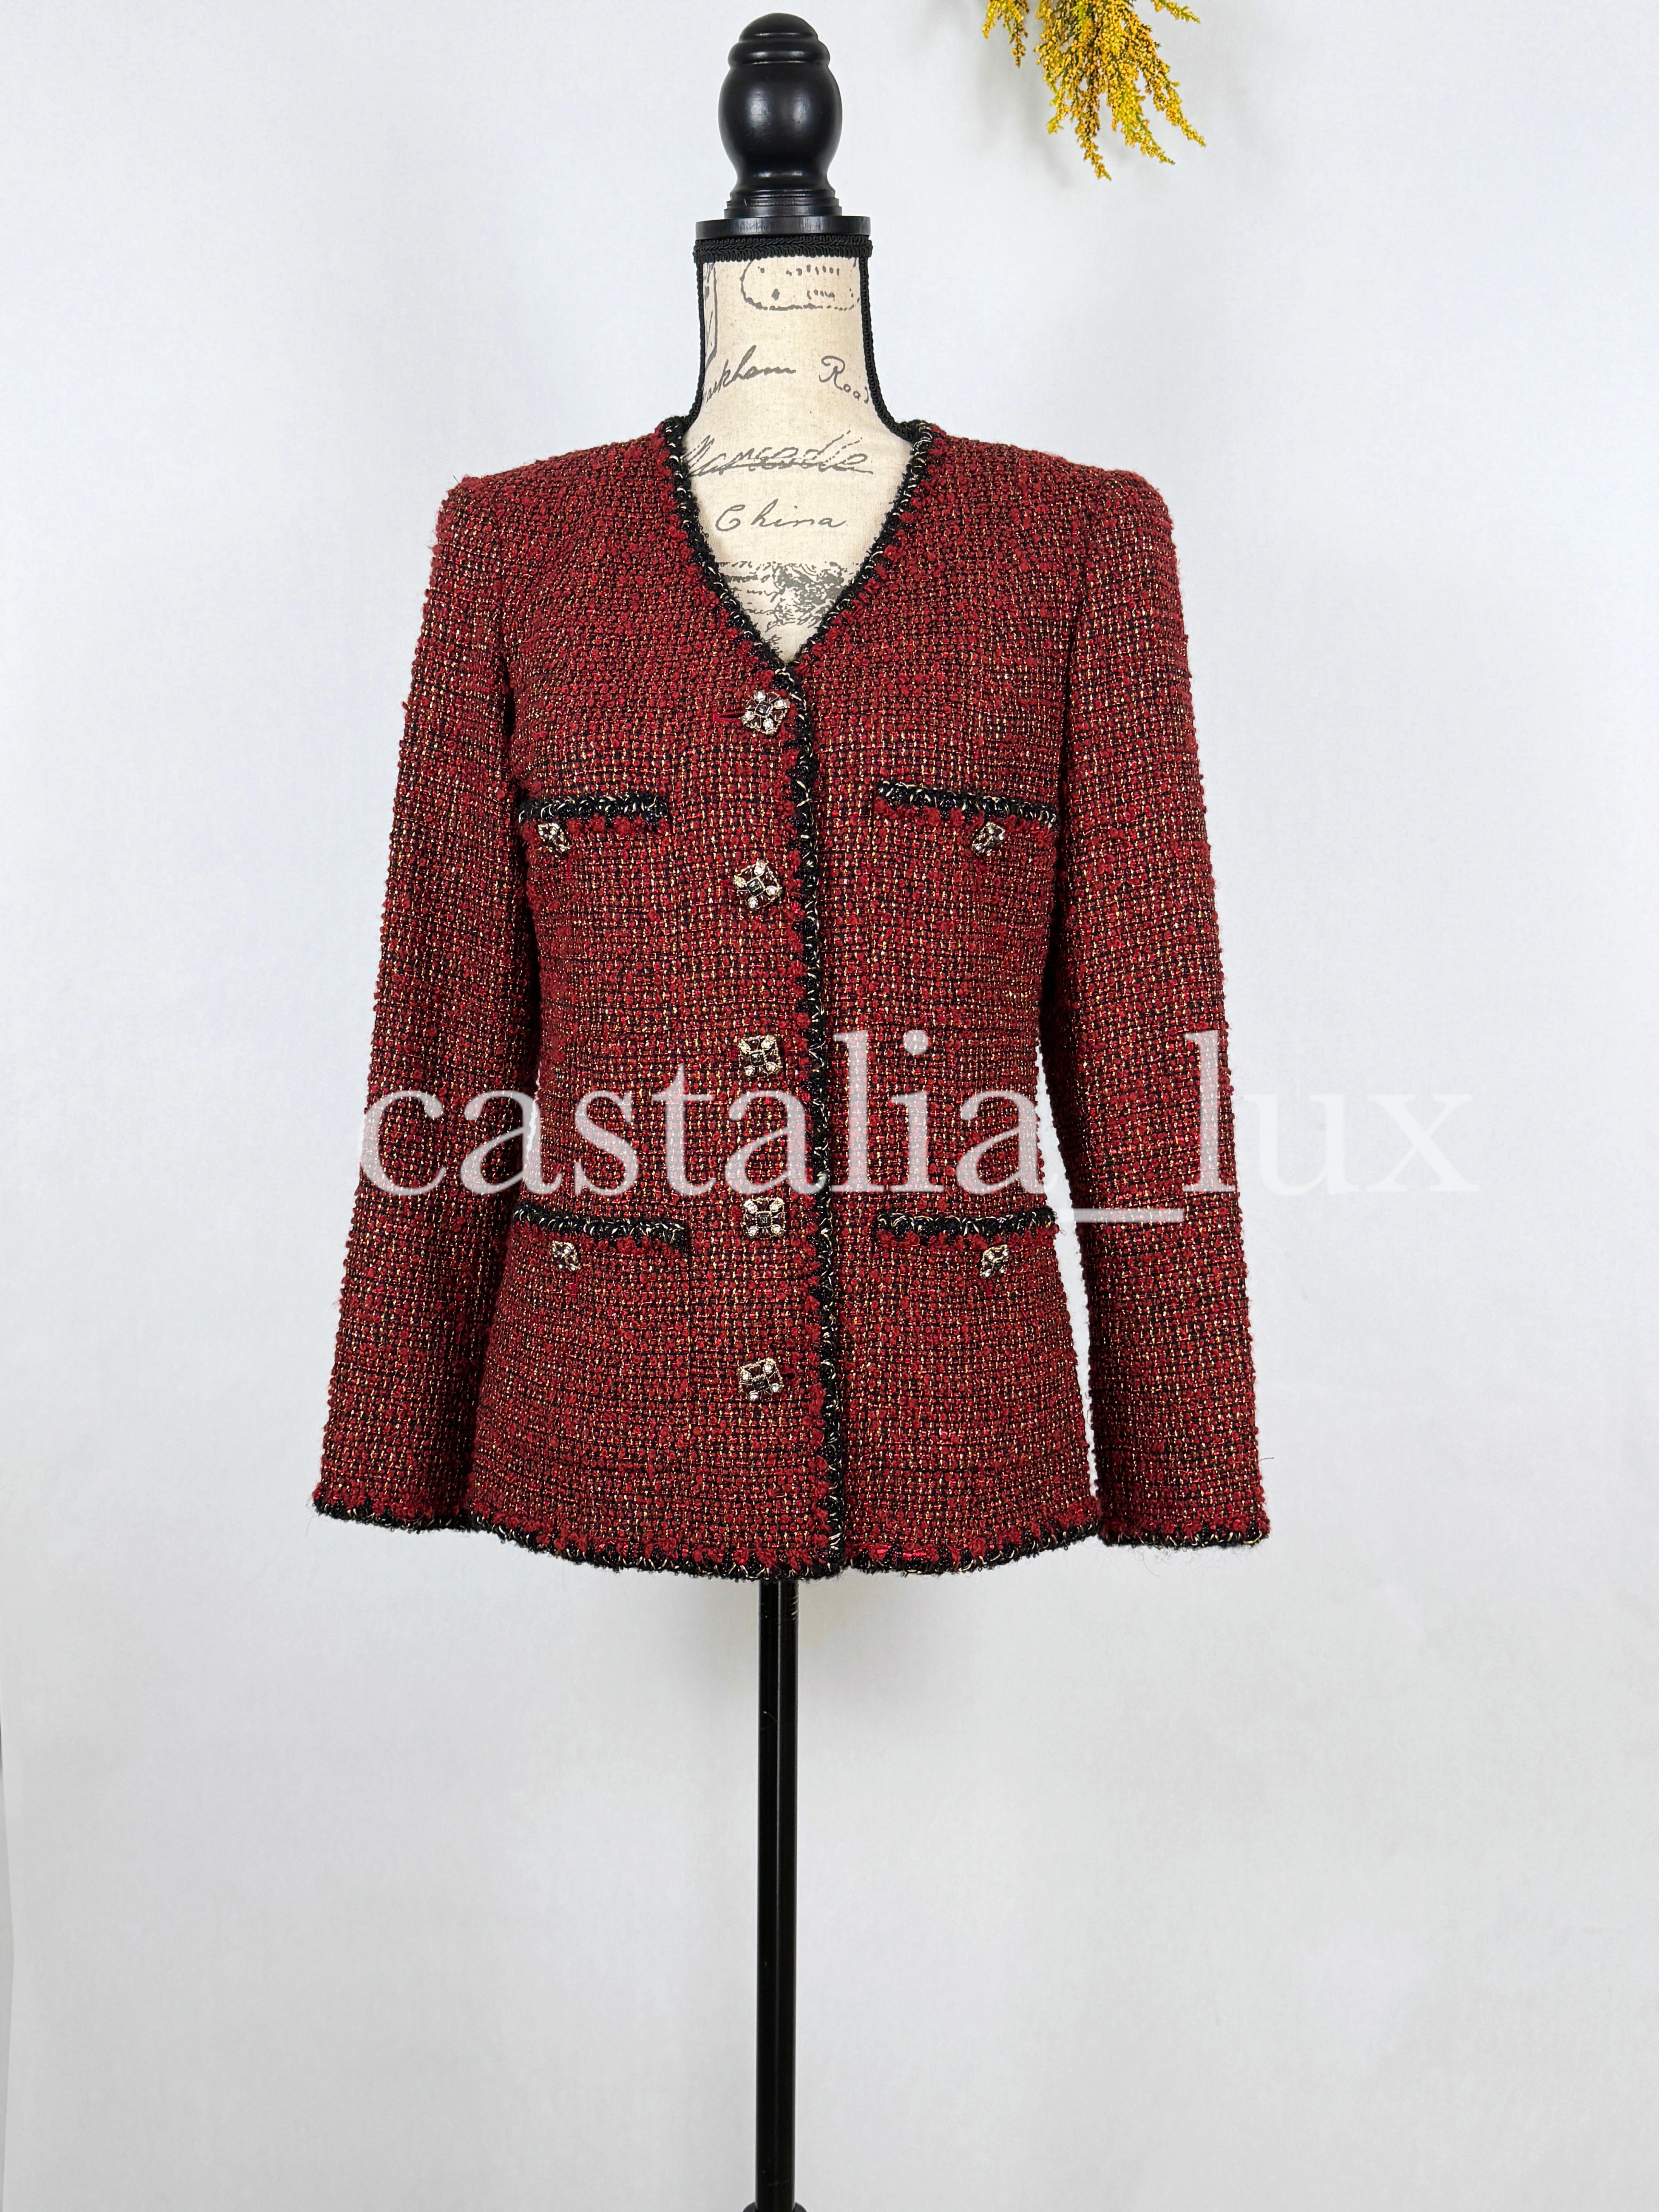 Chanel New Iconic CC Jewel Buttons Lesage Tweed Jacket For Sale 8